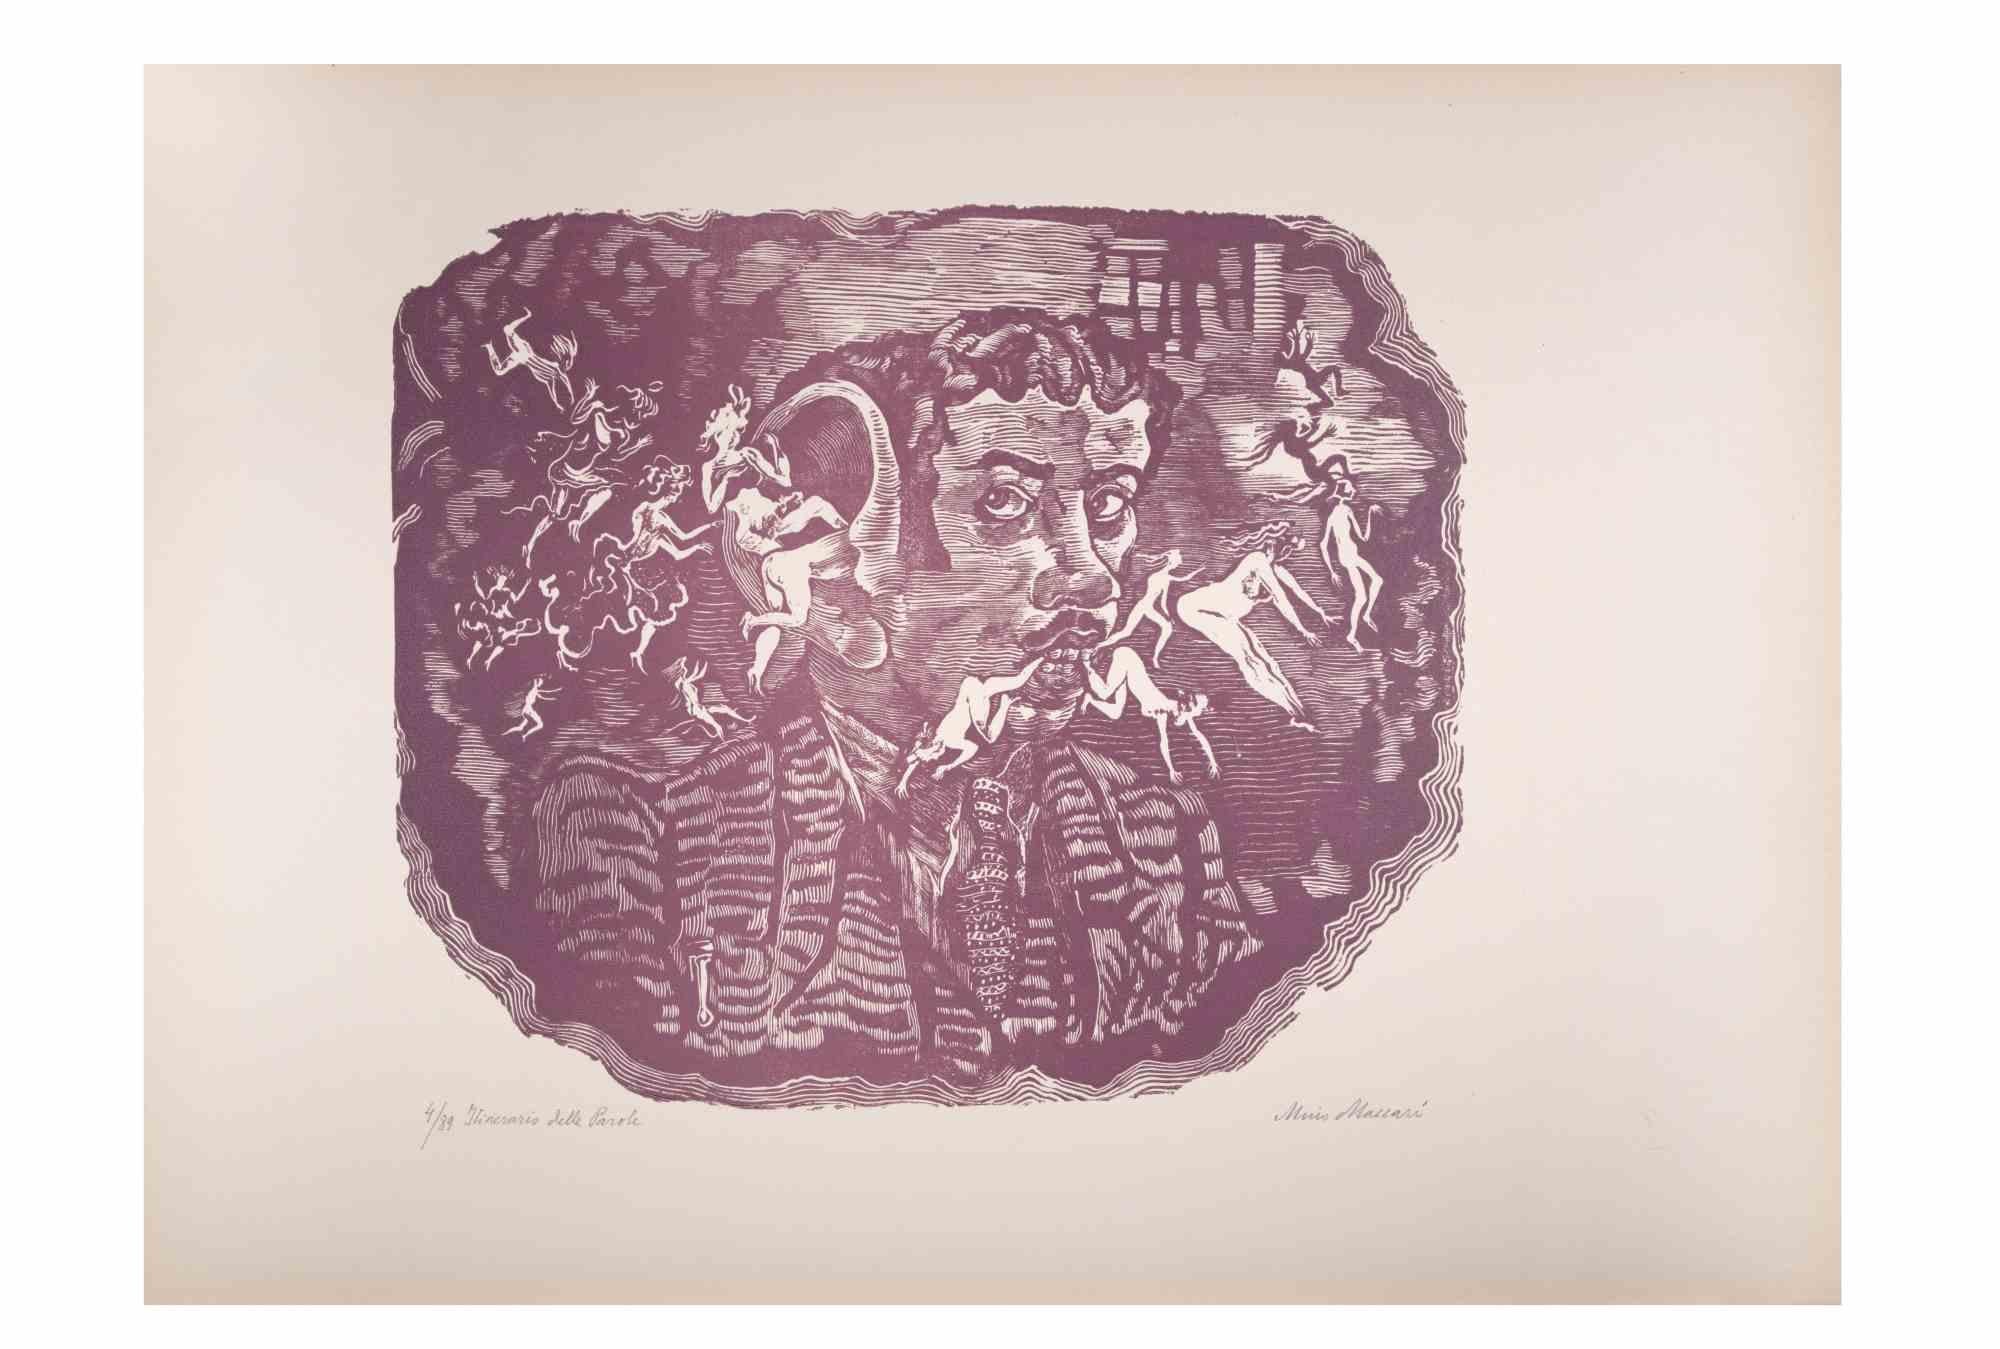 Word itineray is an Artwork realized by Mino Maccari  (1924-1989) in the Mid-20th Century.

Colored woodcut on paper. Hand-signed on the lower, numbered 4/89 specimens and titled on the left margin.

Good conditions.

Mino Maccari (Siena, 1924-Rome,